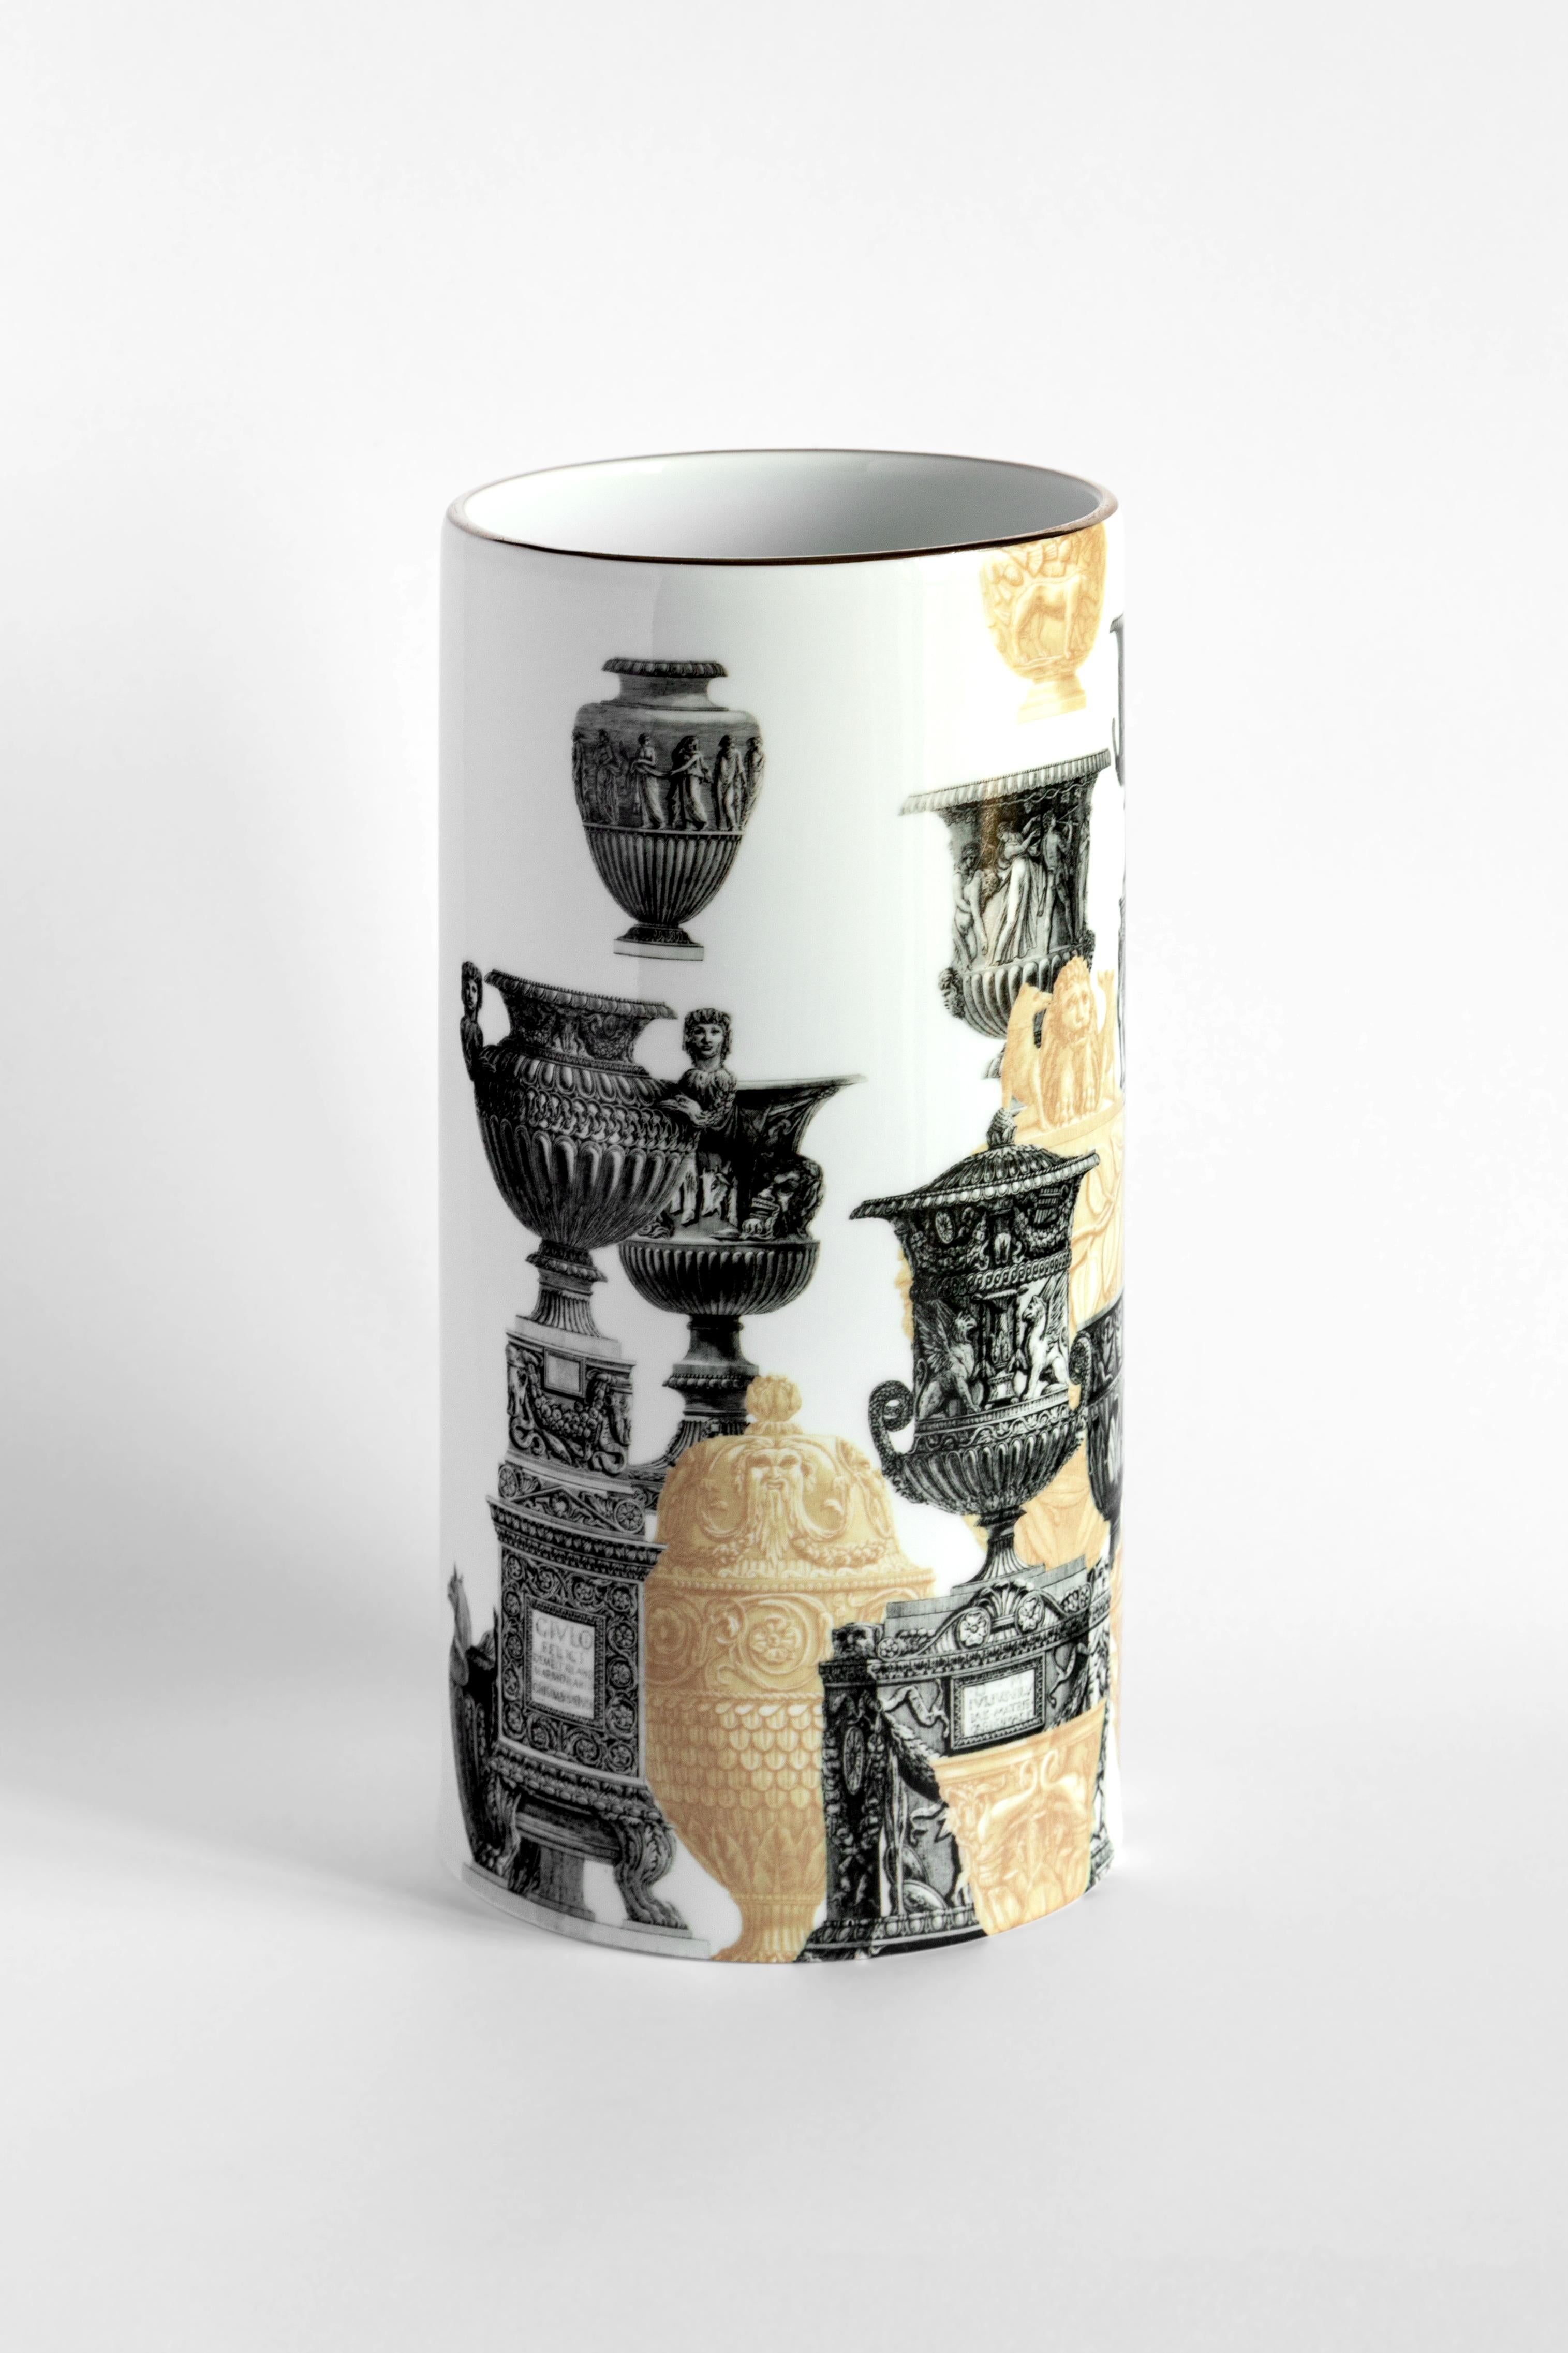 The cylindrical design of this porcelain vase is elevated and made unique by the application of a contemporary and unique decoration. This piece celebrates the eternal city of Rome through a meticulous and exquisite image of multiple ornamental